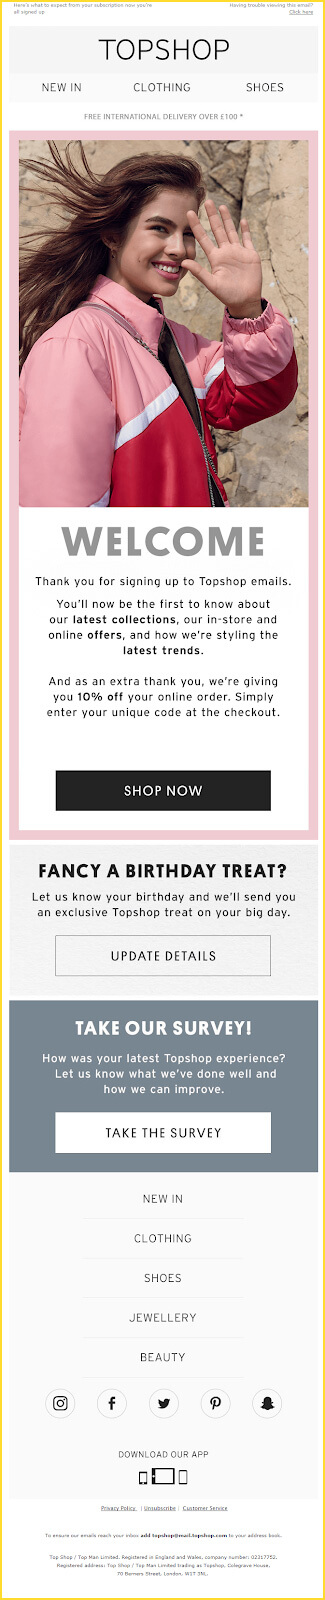 TopShop welcome email